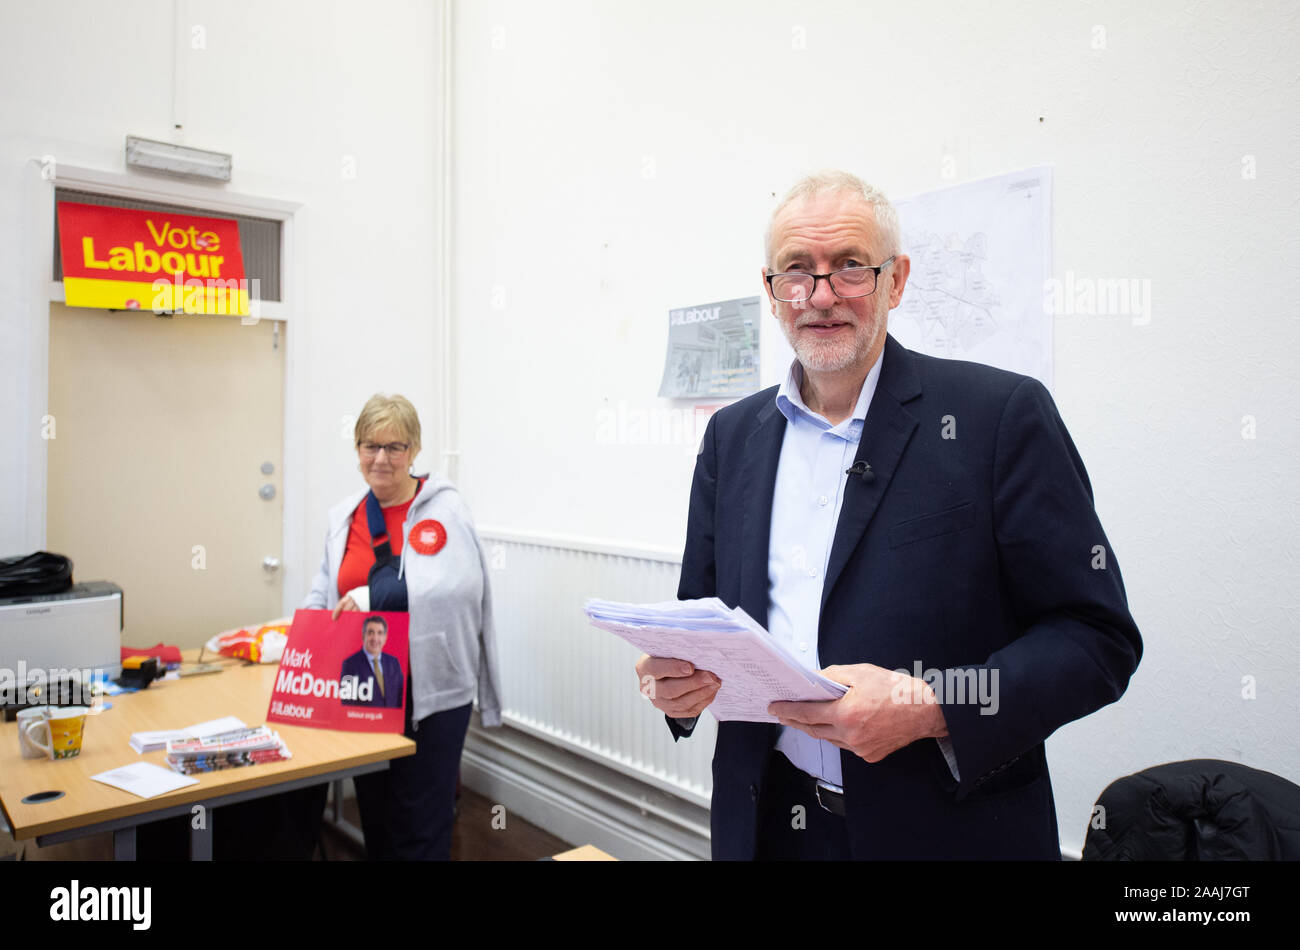 Labour Party leader Jeremy Corbyn with voter registration forms in the campaign office of candidate for Stoke-on-Trent South Mark McDonald, during a visit to Fenton Town Hall, while on the General Election campaign trail. Stock Photo